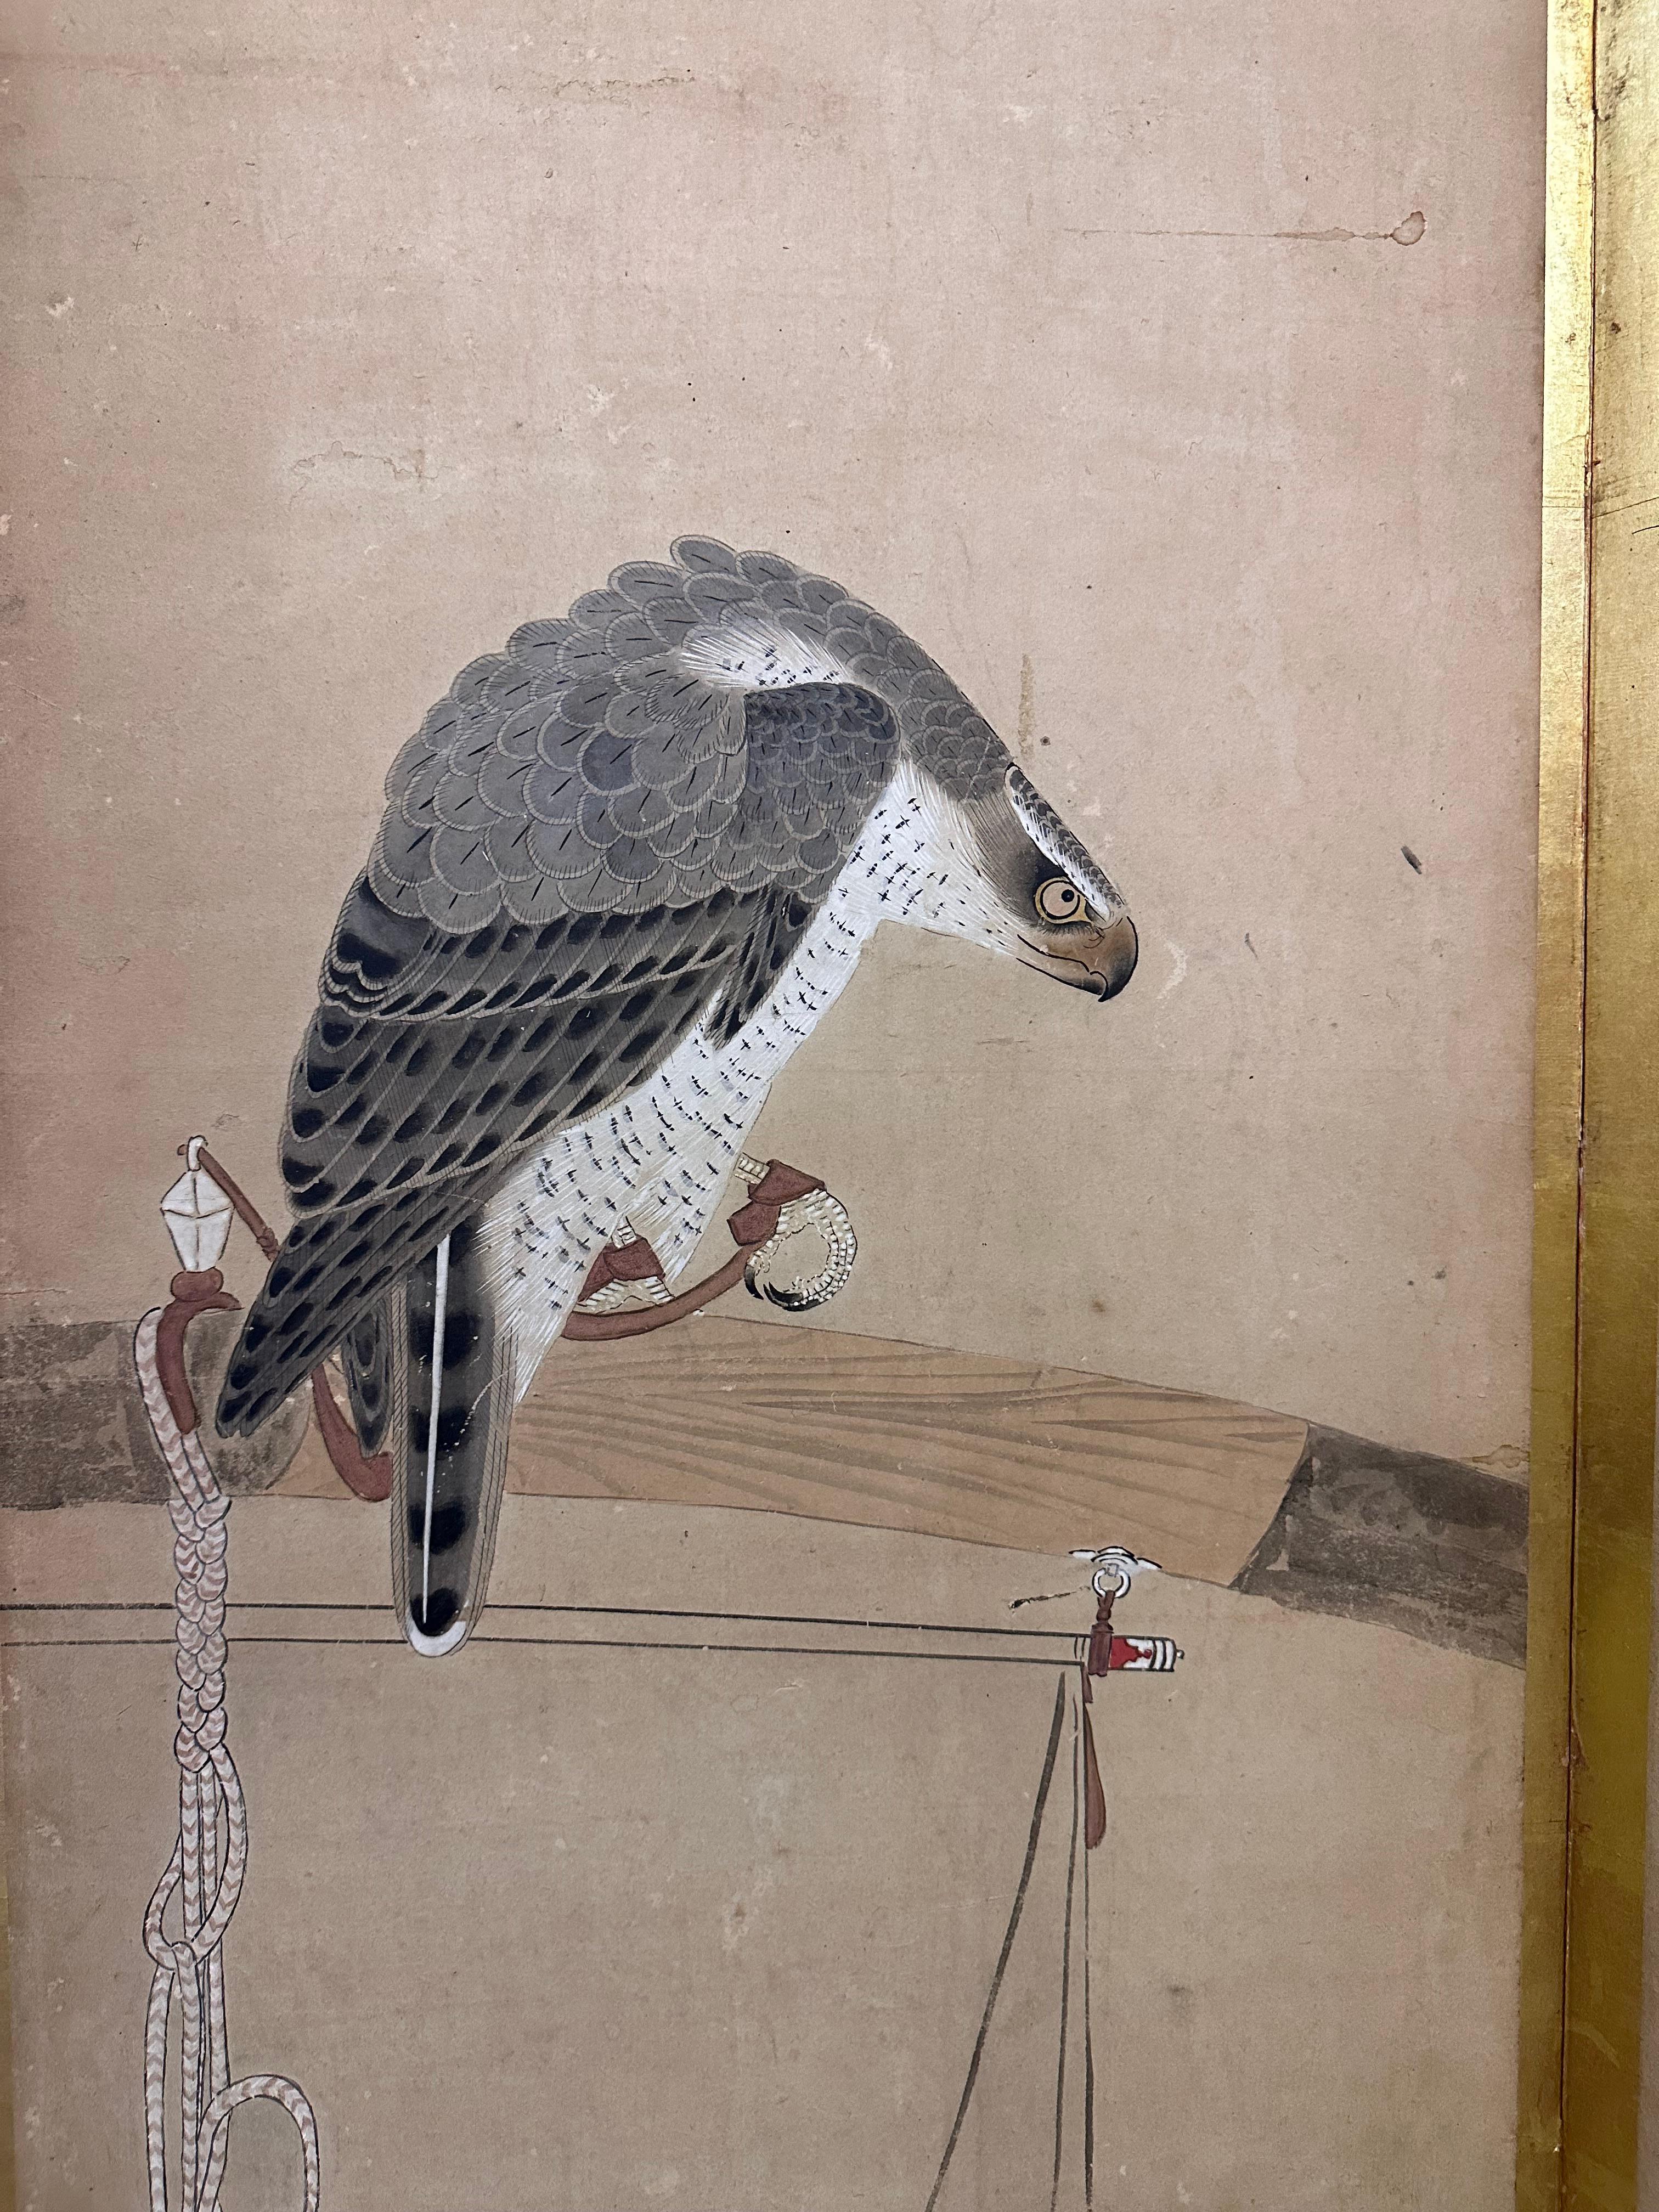 This fine takagari, Japanese traditional falconry screen, is a rare and valuable work of art. It dates back to the 17-18th century and belonged to a noble samurai residence. The screen depicts several falcons, seated on ornate stands. The birds are